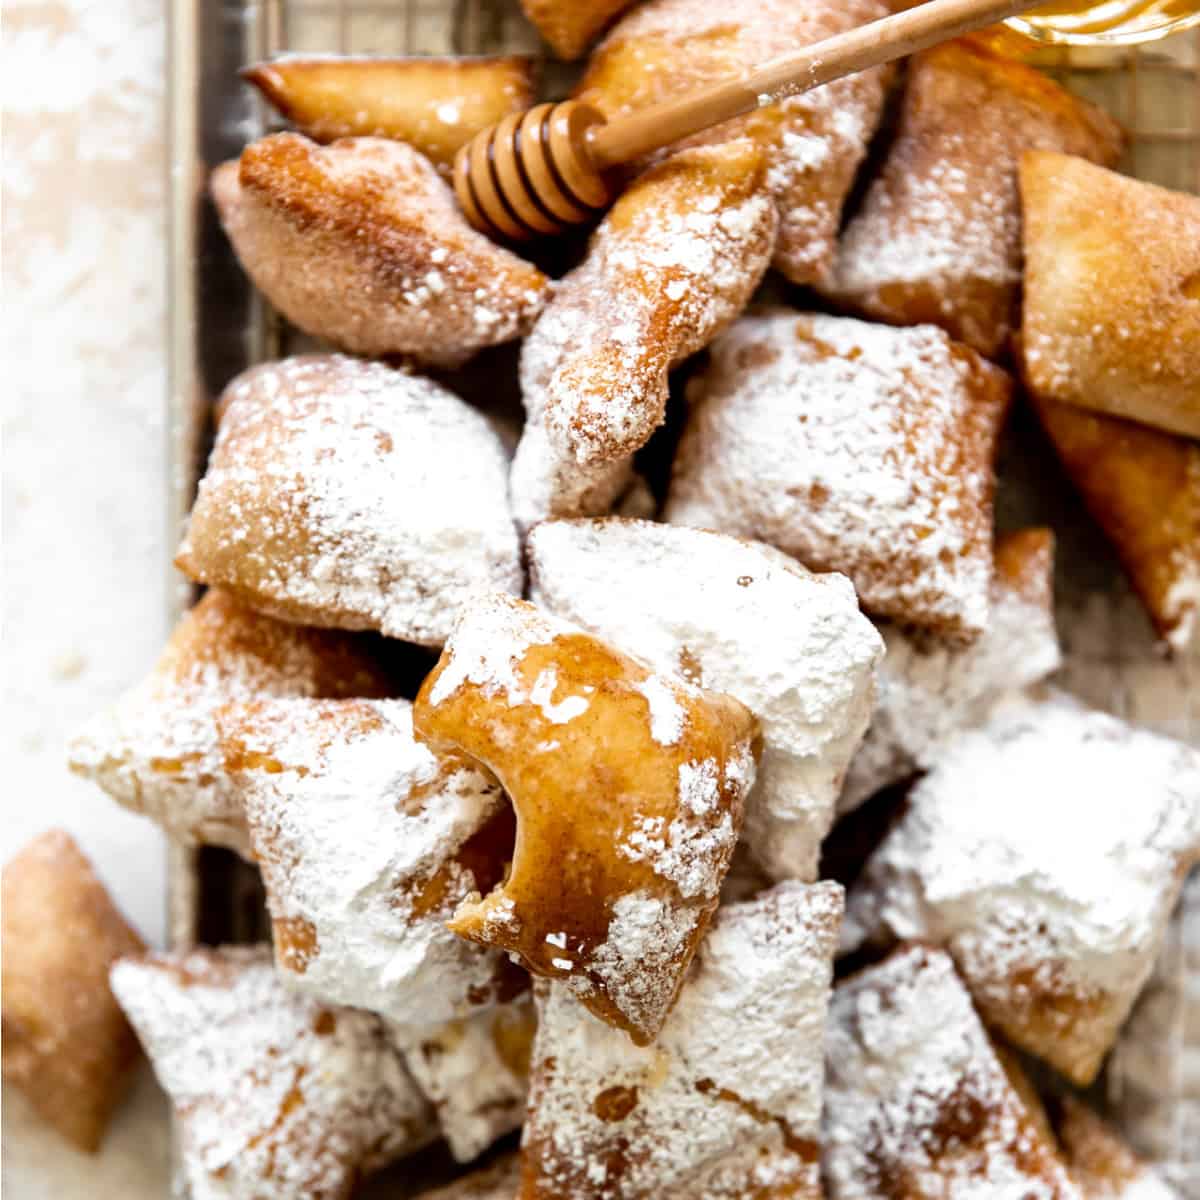 Tray filled with sopapillas coated with powdered sugar and drizzled with honey.